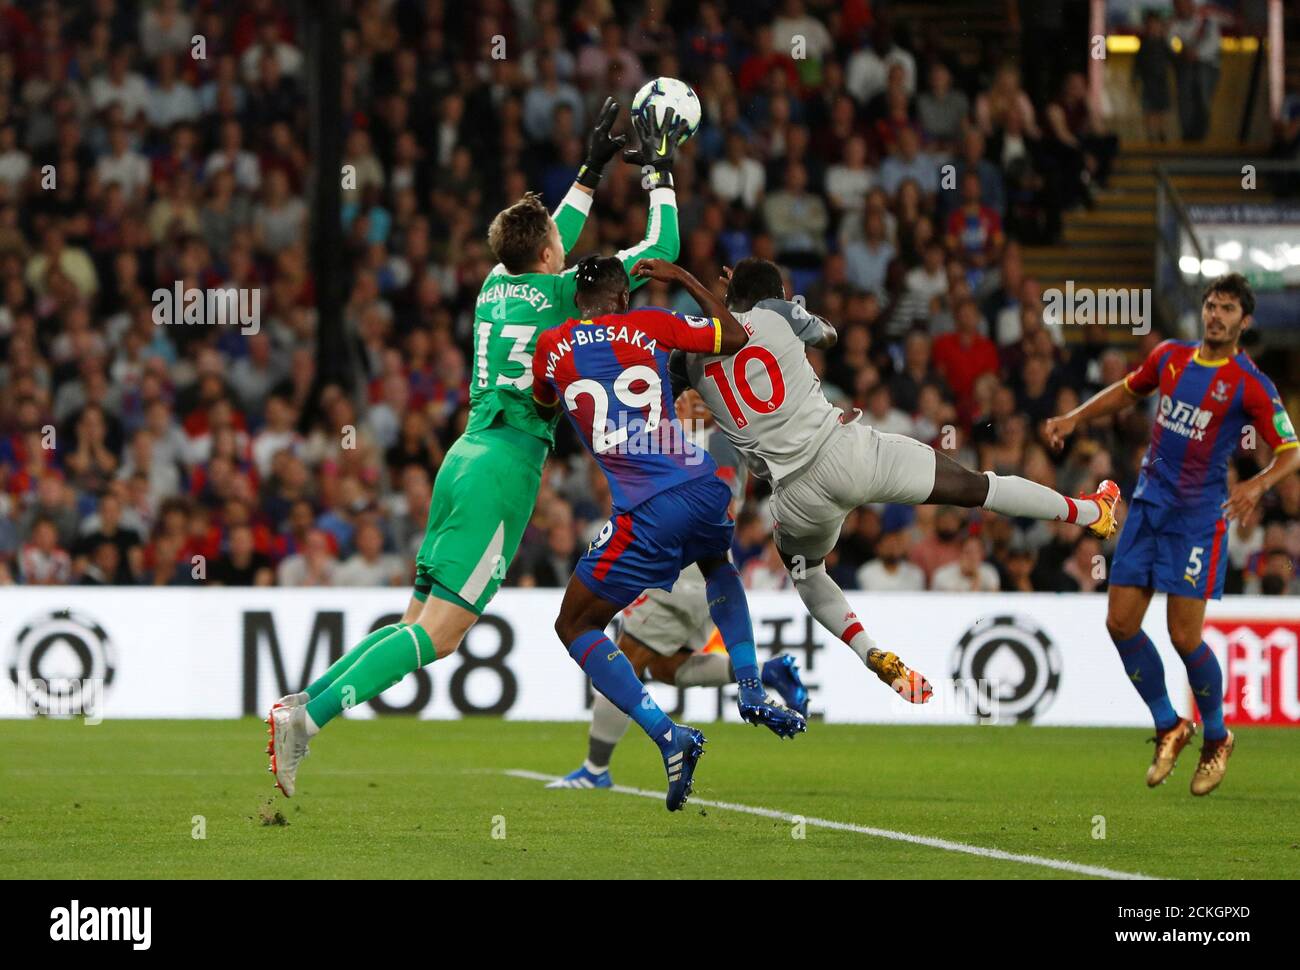 Soccer Football - Premier League - Crystal Palace v Liverpool - Selhurst Park, London, Britain - August 20, 2018  Crystal Palace's Wayne Hennessey in action with Aaron Wan-Bissaka and Liverpool's Sadio Mane              Action Images via Reuters/John Sibley  EDITORIAL USE ONLY. No use with unauthorized audio, video, data, fixture lists, club/league logos or 'live' services. Online in-match use limited to 75 images, no video emulation. No use in betting, games or single club/league/player publications.  Please contact your account representative for further details. Stock Photo